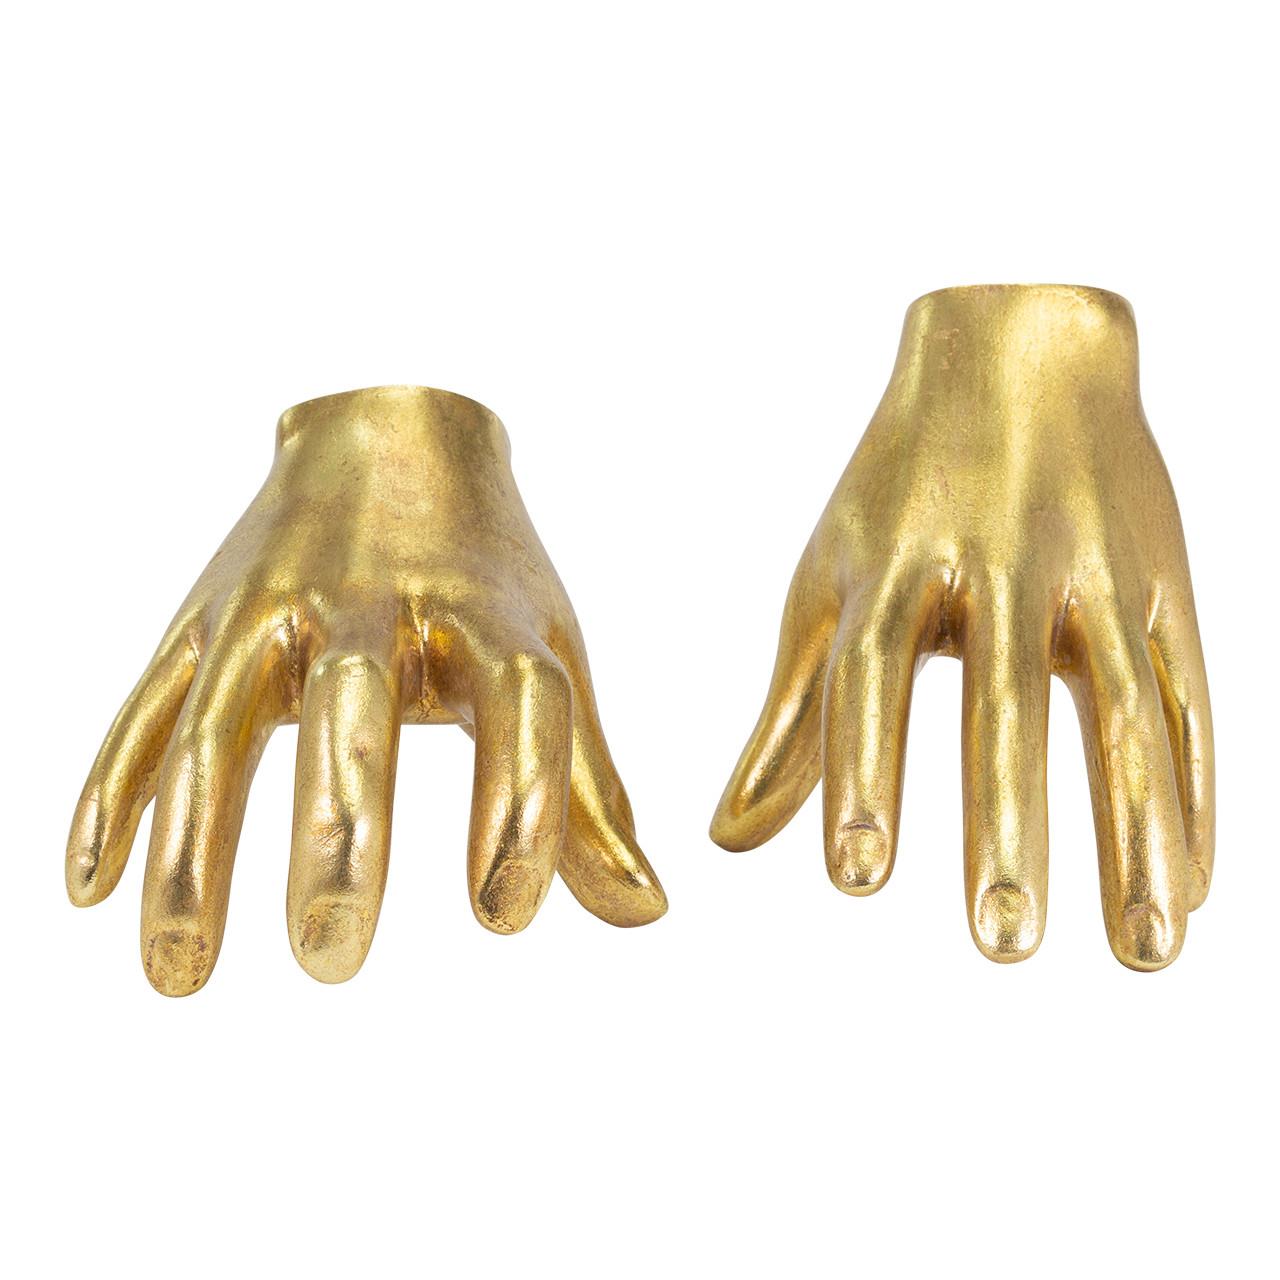 Picture of Reaching Hands Gold, Set of 2